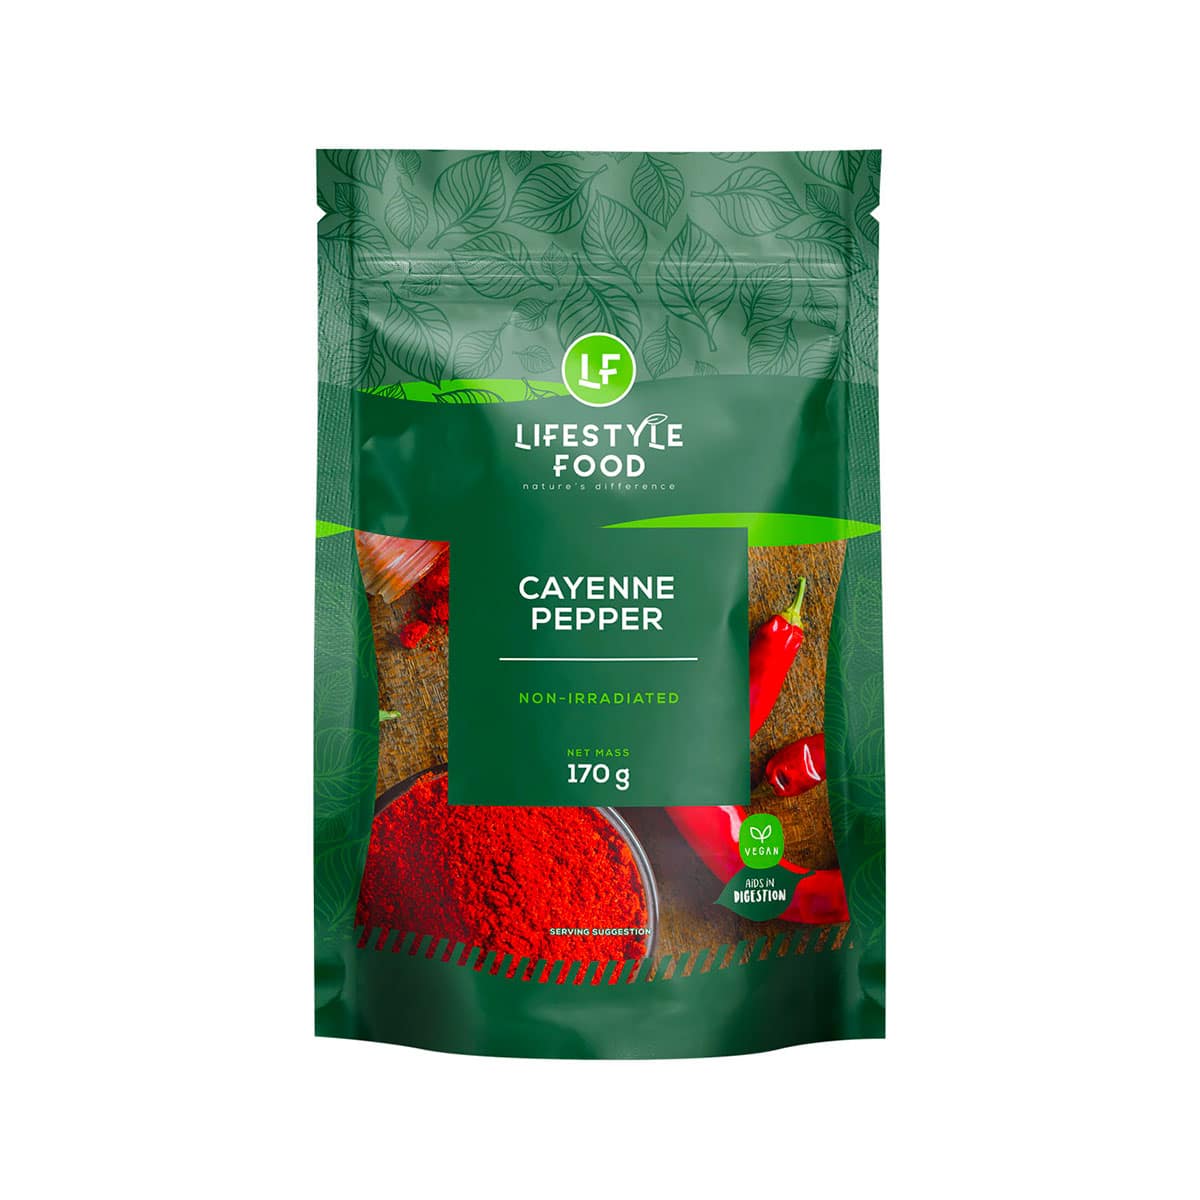 Lifestyle Food Cayenne Pepper Non-Irradiated - 170g